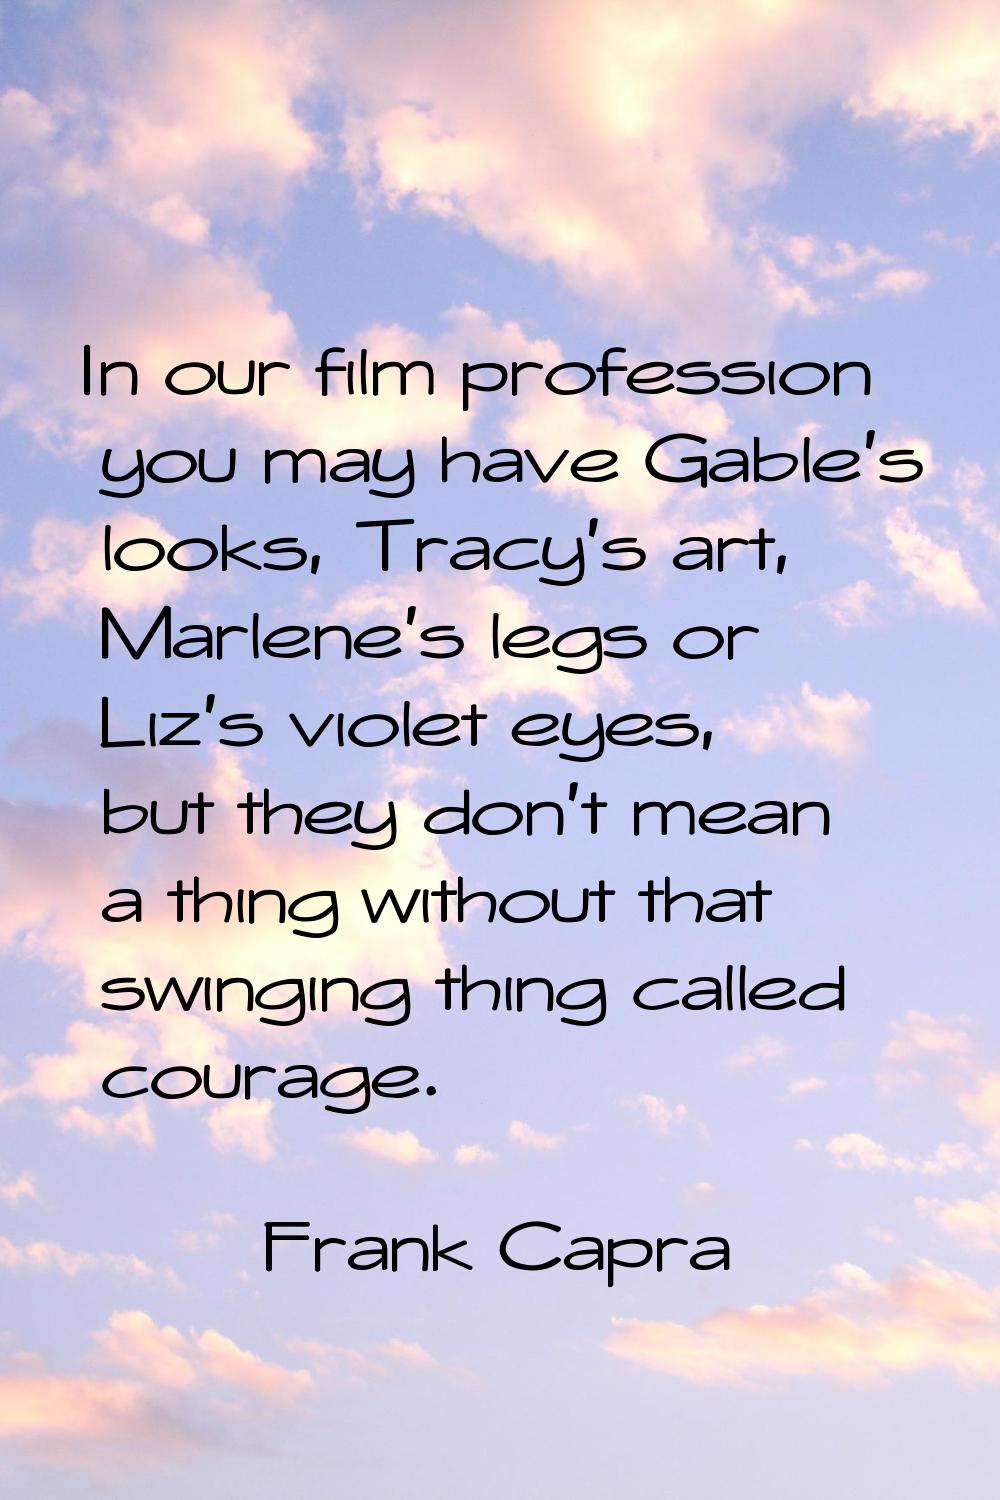 In our film profession you may have Gable's looks, Tracy's art, Marlene's legs or Liz's violet eyes